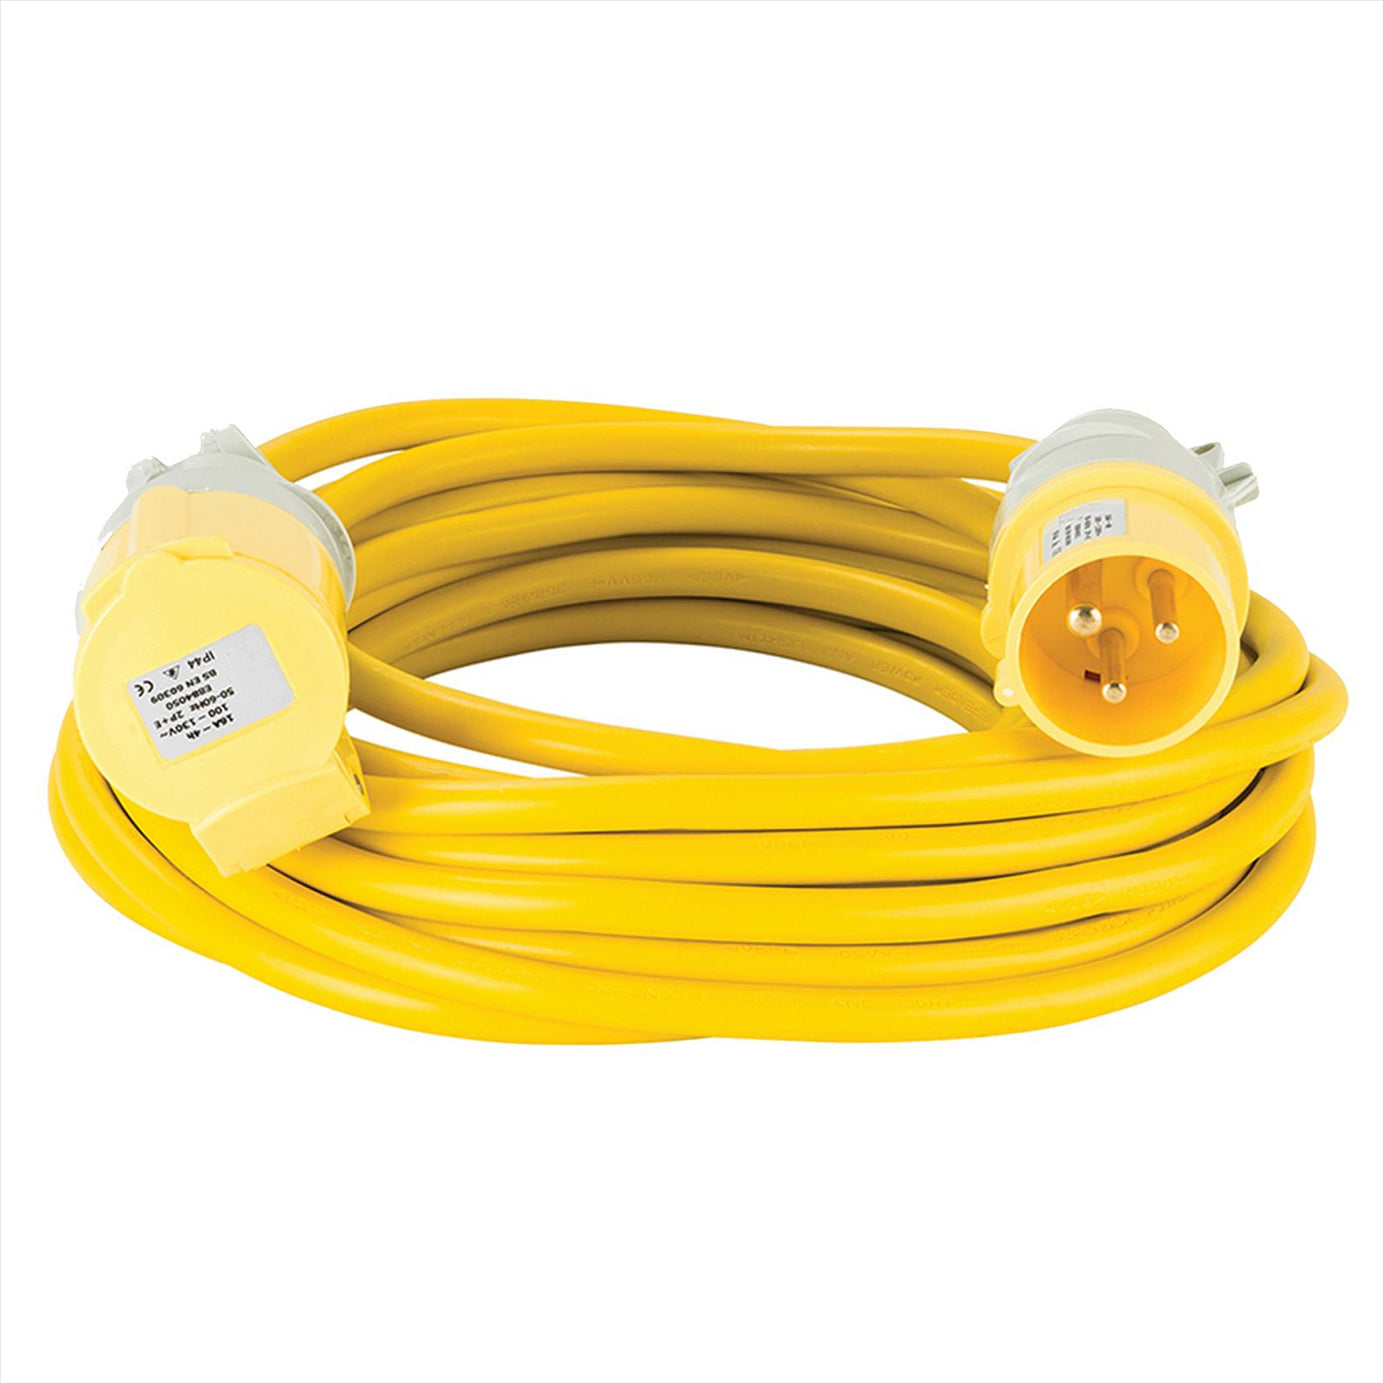 Defender Arctic Extension Lead Yellow 16A 2.5mm2 10m 110V